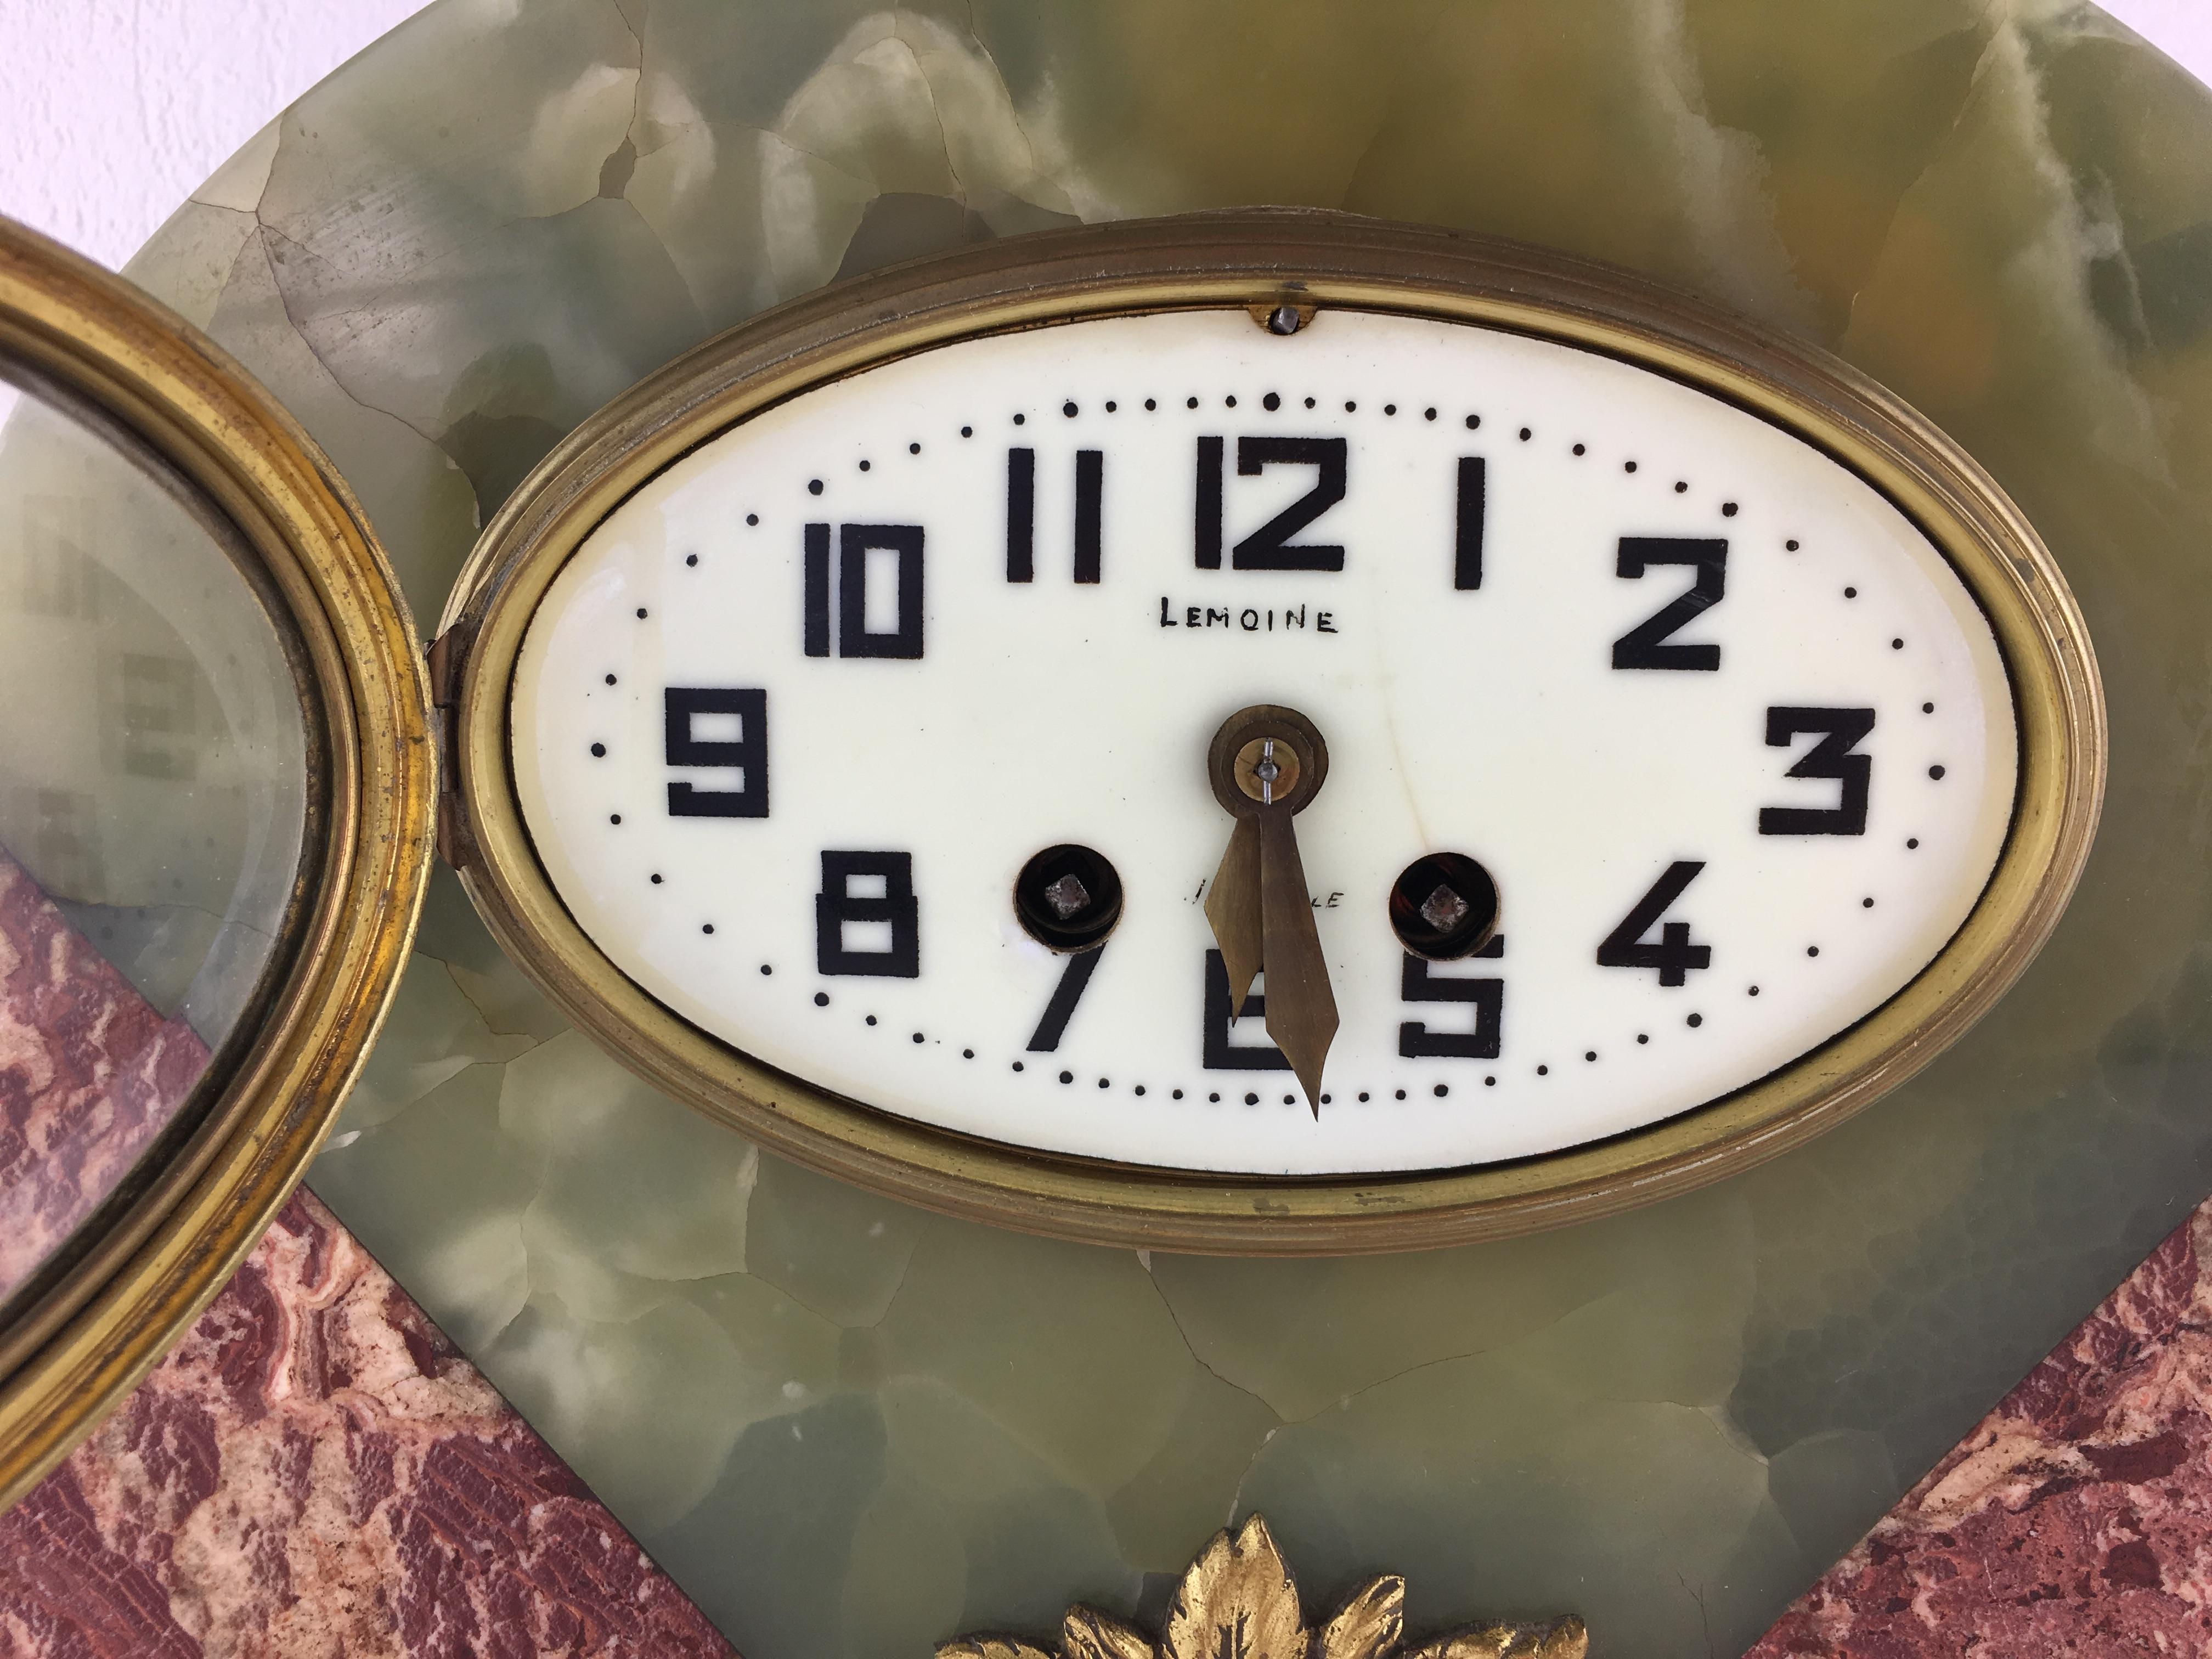 A stunning three piece French Art Deco Mantel Clock and garniture set with a fine French movement by and stamped Bennet & Pottier made in Paris, France. Finished on all sides, the stone quality and craftsmanship are of high quality.

Trendy green